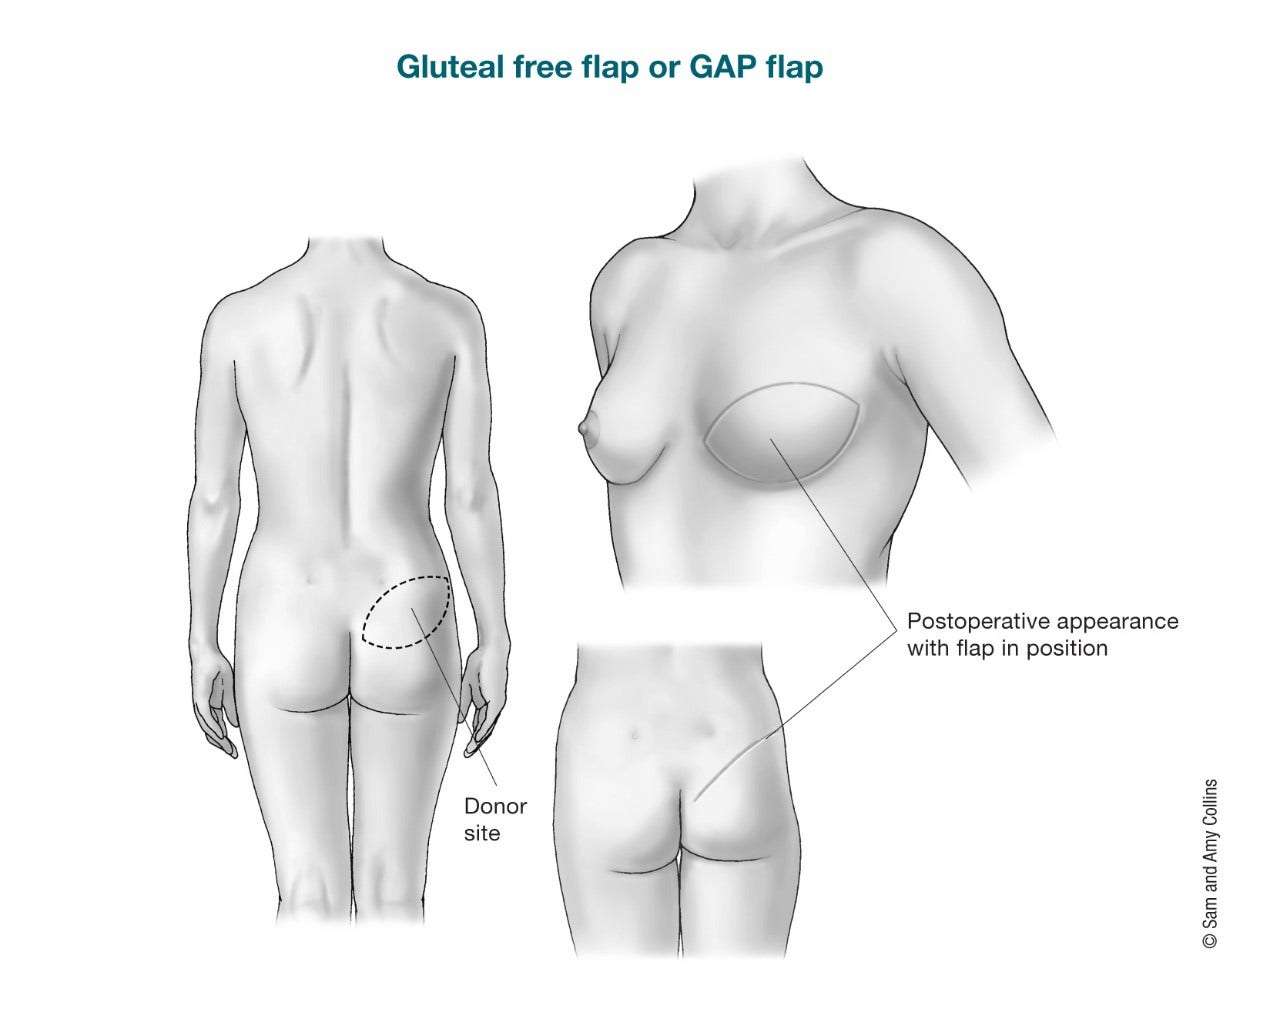 The Risks & Benefits of DIEP Flap Surgery After a Mastectomy